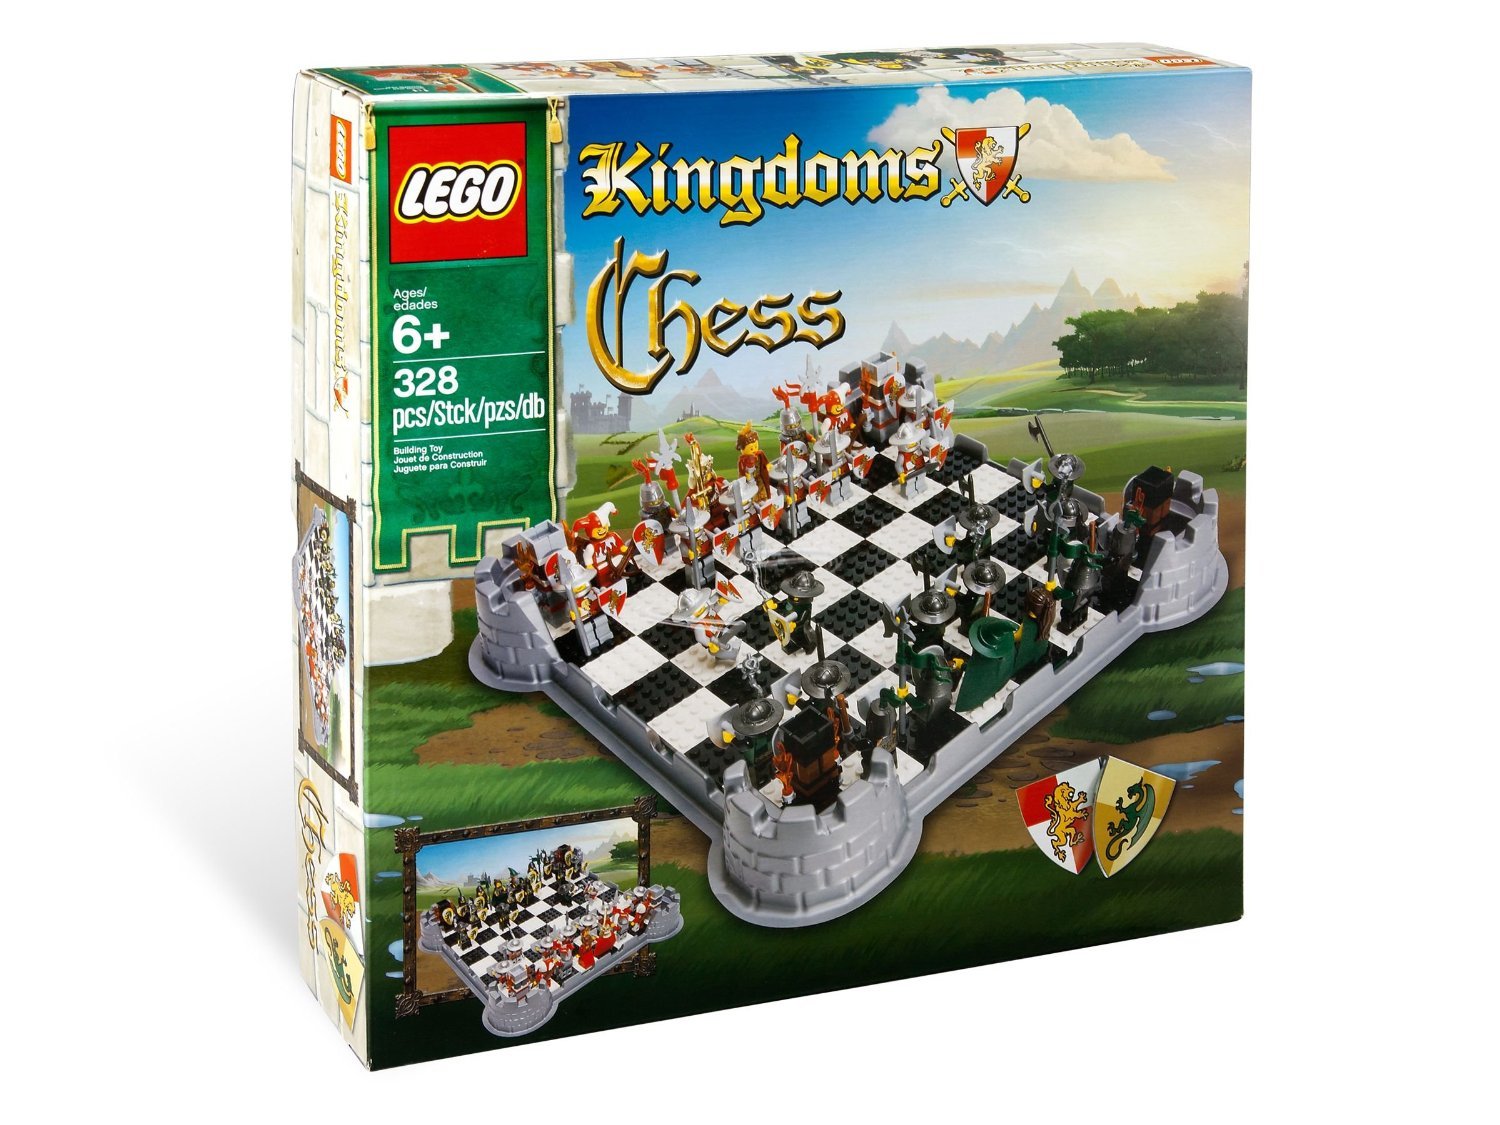 9 Best LEGO Chess Sets 2022 - Buying Guide & Reviews 2